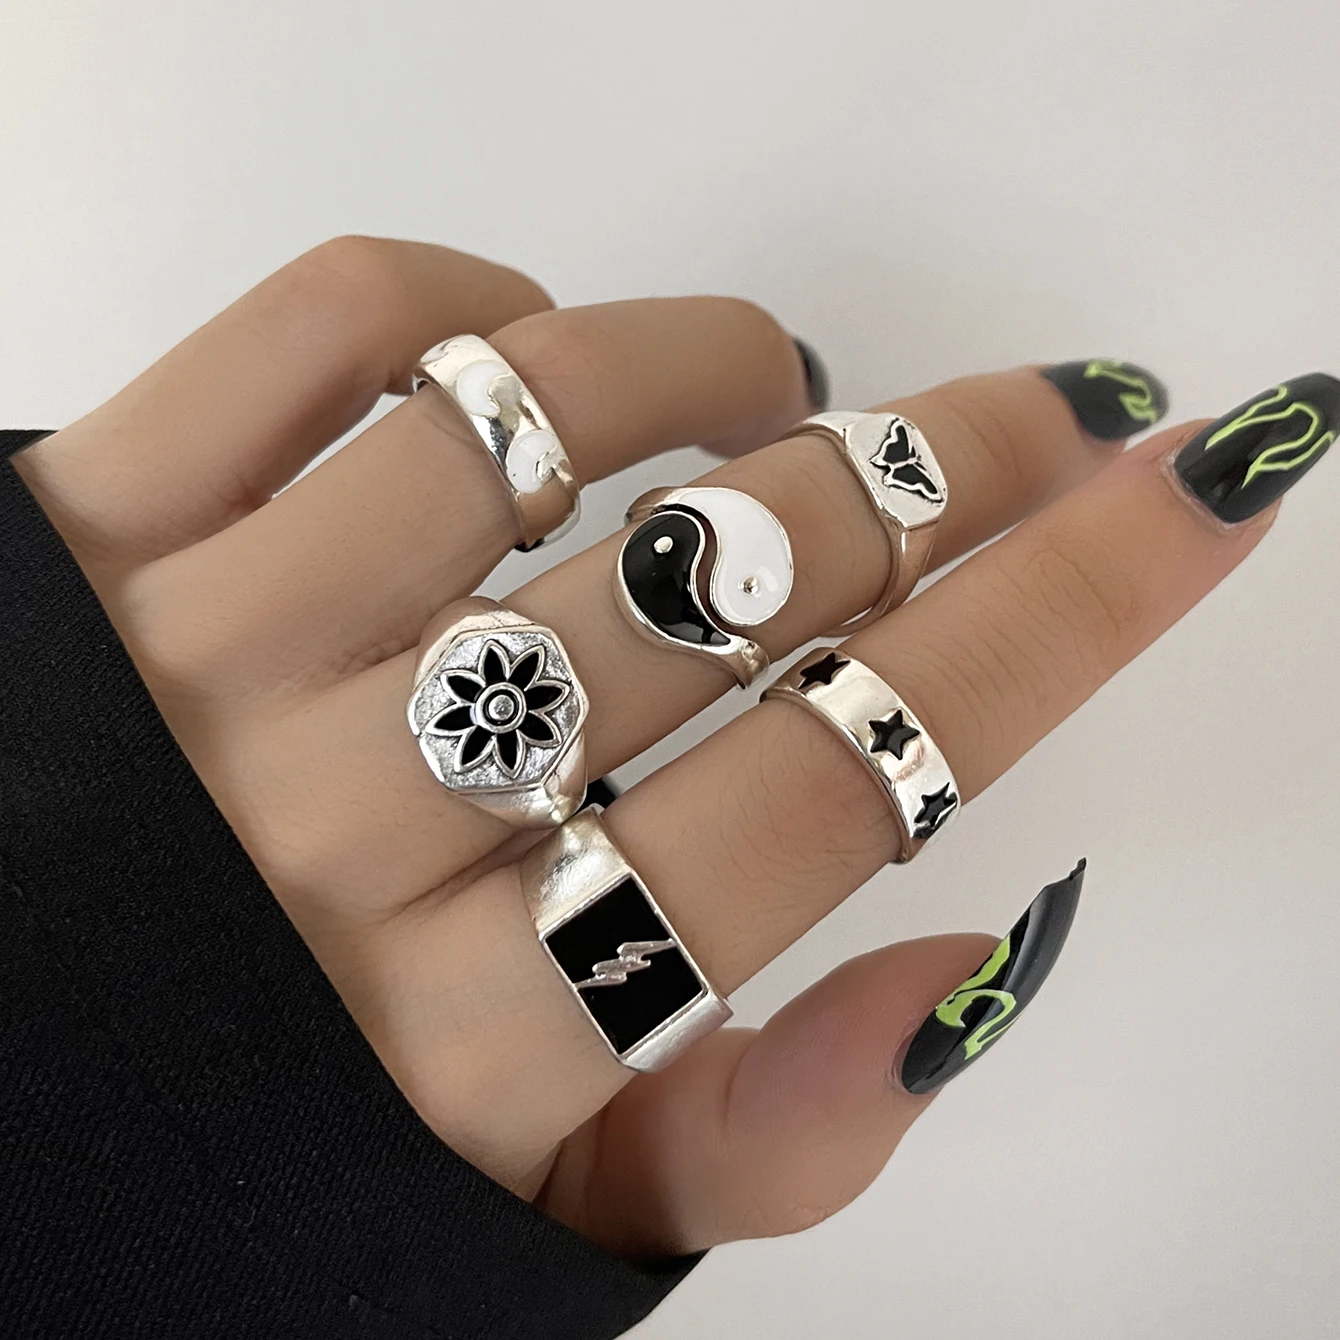 

Aprilwell 6 Pcs Gothic Tai Chi Ring Set for Women Aesthetic 2021 Trend Punk Lightning Kpop Anxiety Chunky Retro Anillos Jewelry